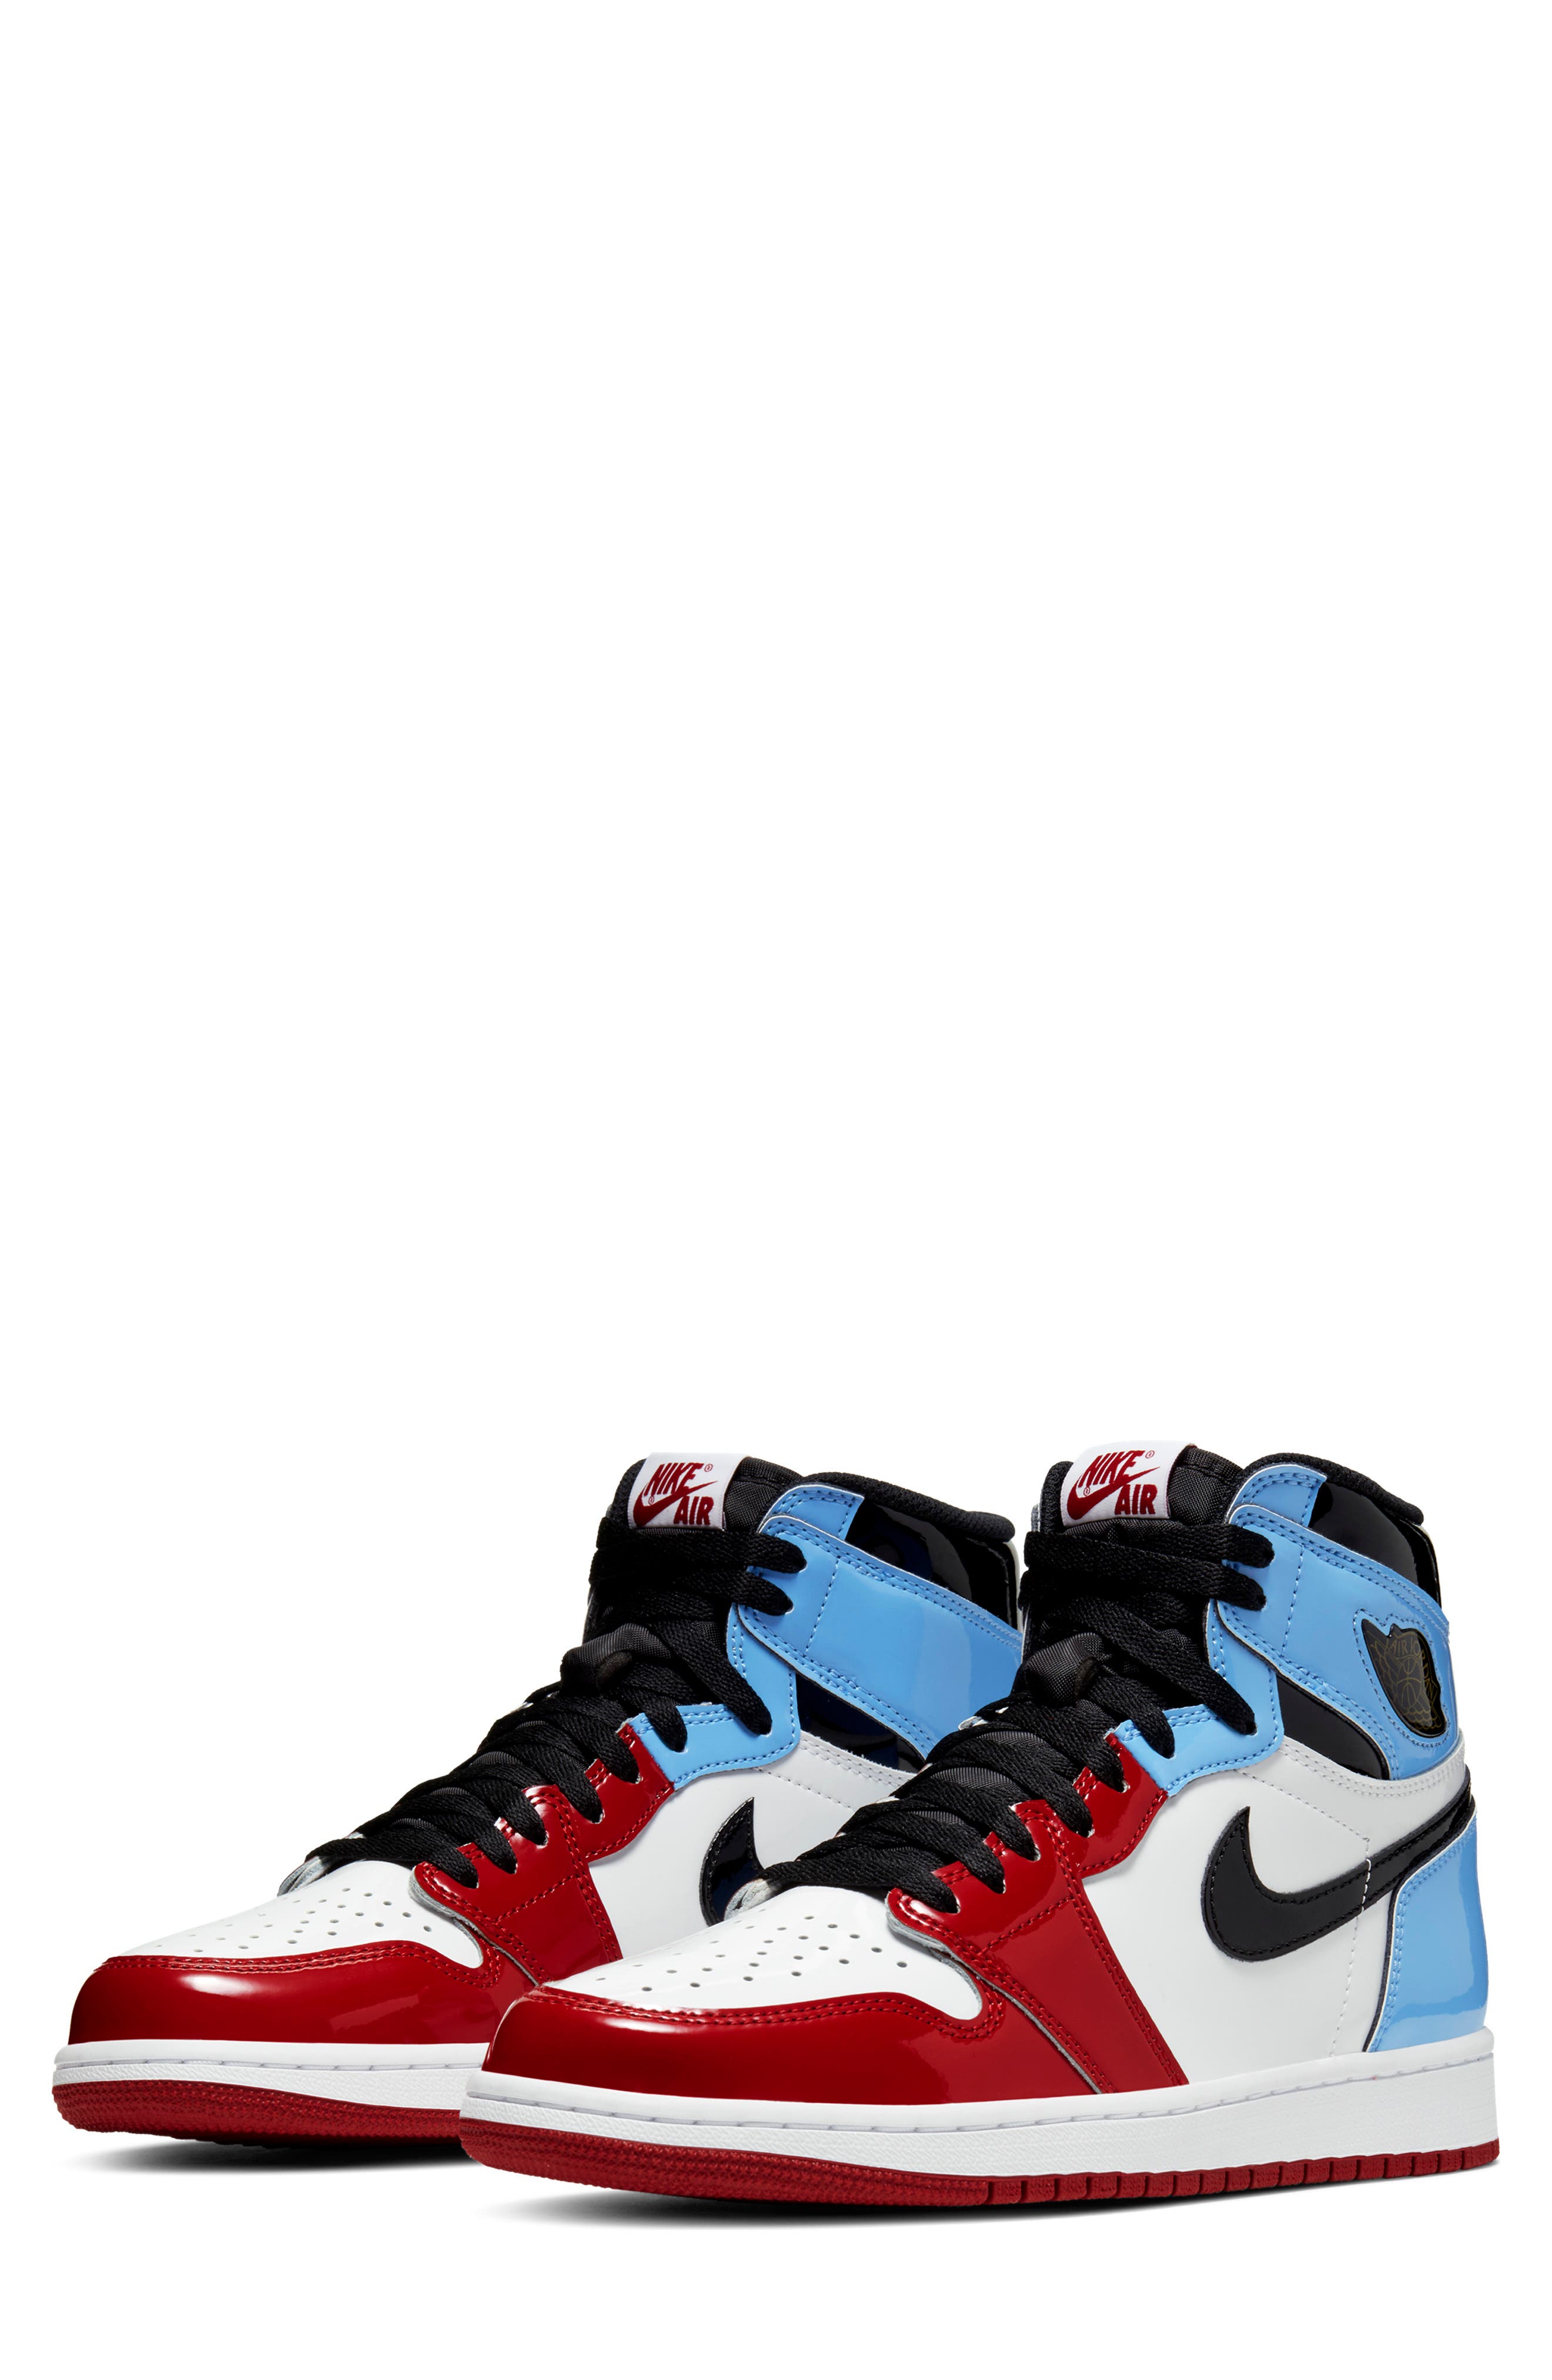 blue and red nike high tops